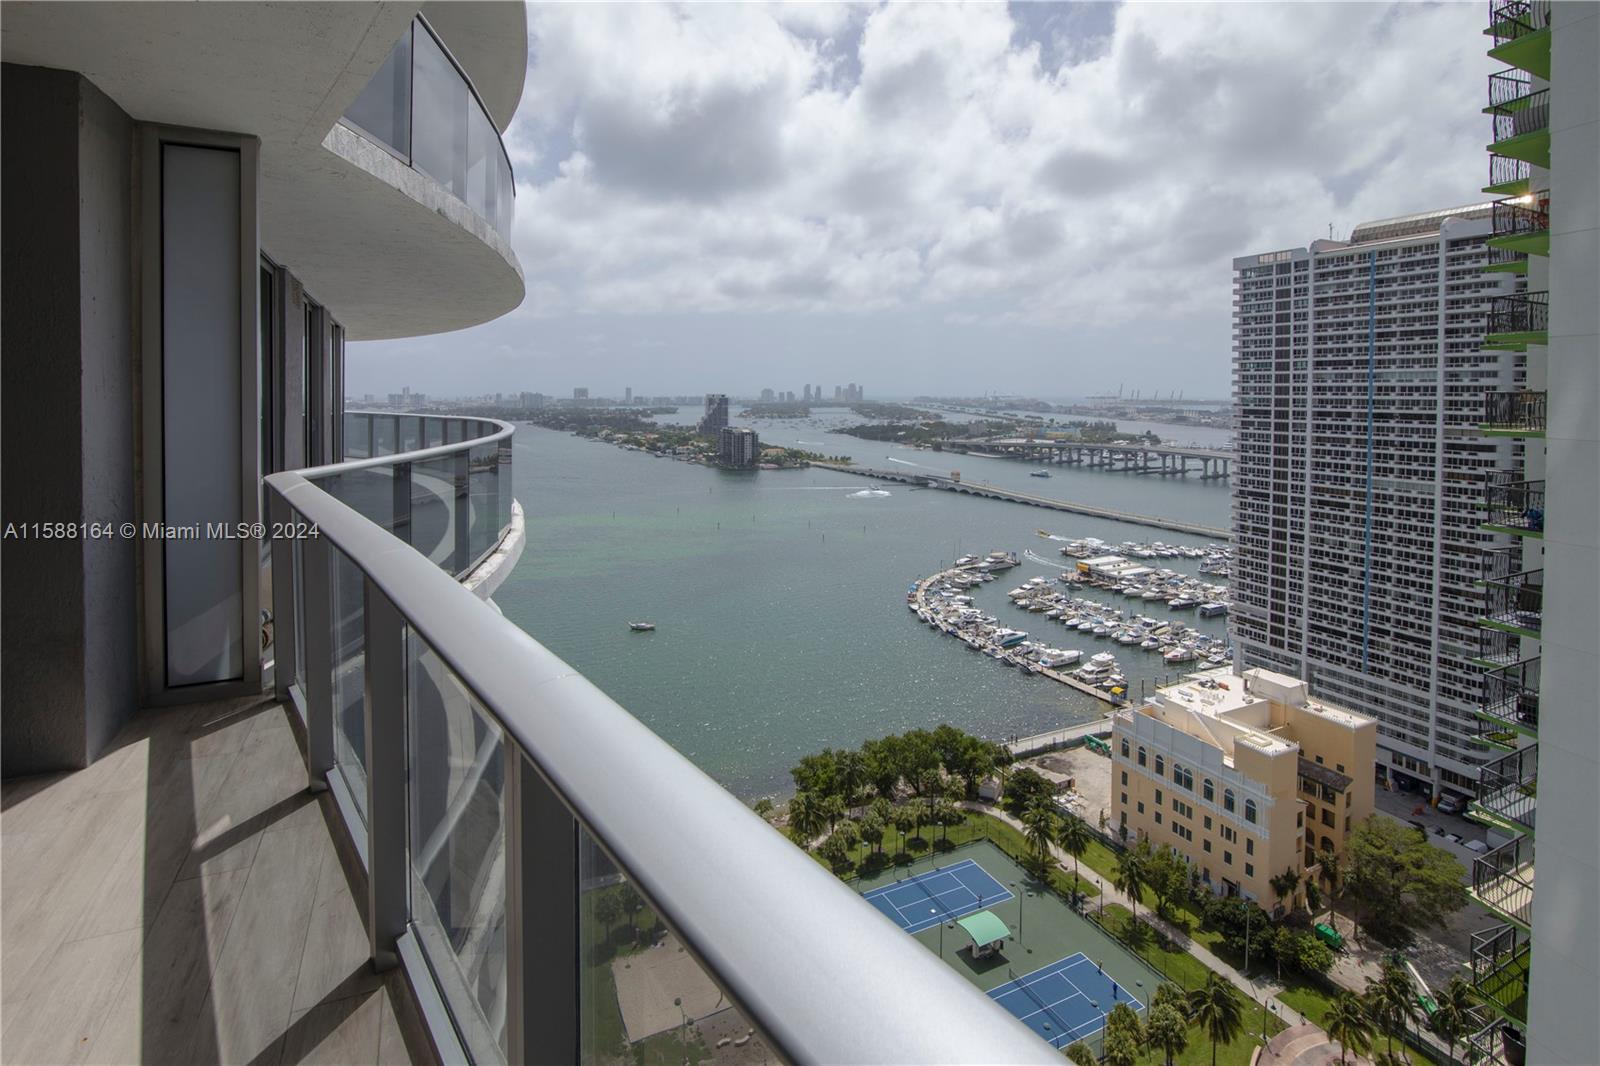 Breathtaking water views of Venetian Causeway and Miami Beach Skyline. Designer decorated contemporary furnished 3 bedrooms /3.5 bathrooms apartment at Aria on the Bay. Spacious apartment with upgraded open European Style kitchen with Bosch appliances, full size washer & dryer, ceramic floors, build in European closet cabinets, electric blinds. Large wrapped around balcony. Private elevator foyer for the unit. Aria on the Bay is a luxury condominium full of amenities: 2 Pools, Gym, Yoga Room, Sauna, Jacuzzi, Pool Table, Kids Playroom, spacious social areas, 24 hours security and lobby attended, valet parking. Located in the Edgewater neighborhood walking distance to Miami's Art and Entertainment center, Margaret Pace. Close to design district, Miami Beach, and Brickell. Easy to access I95